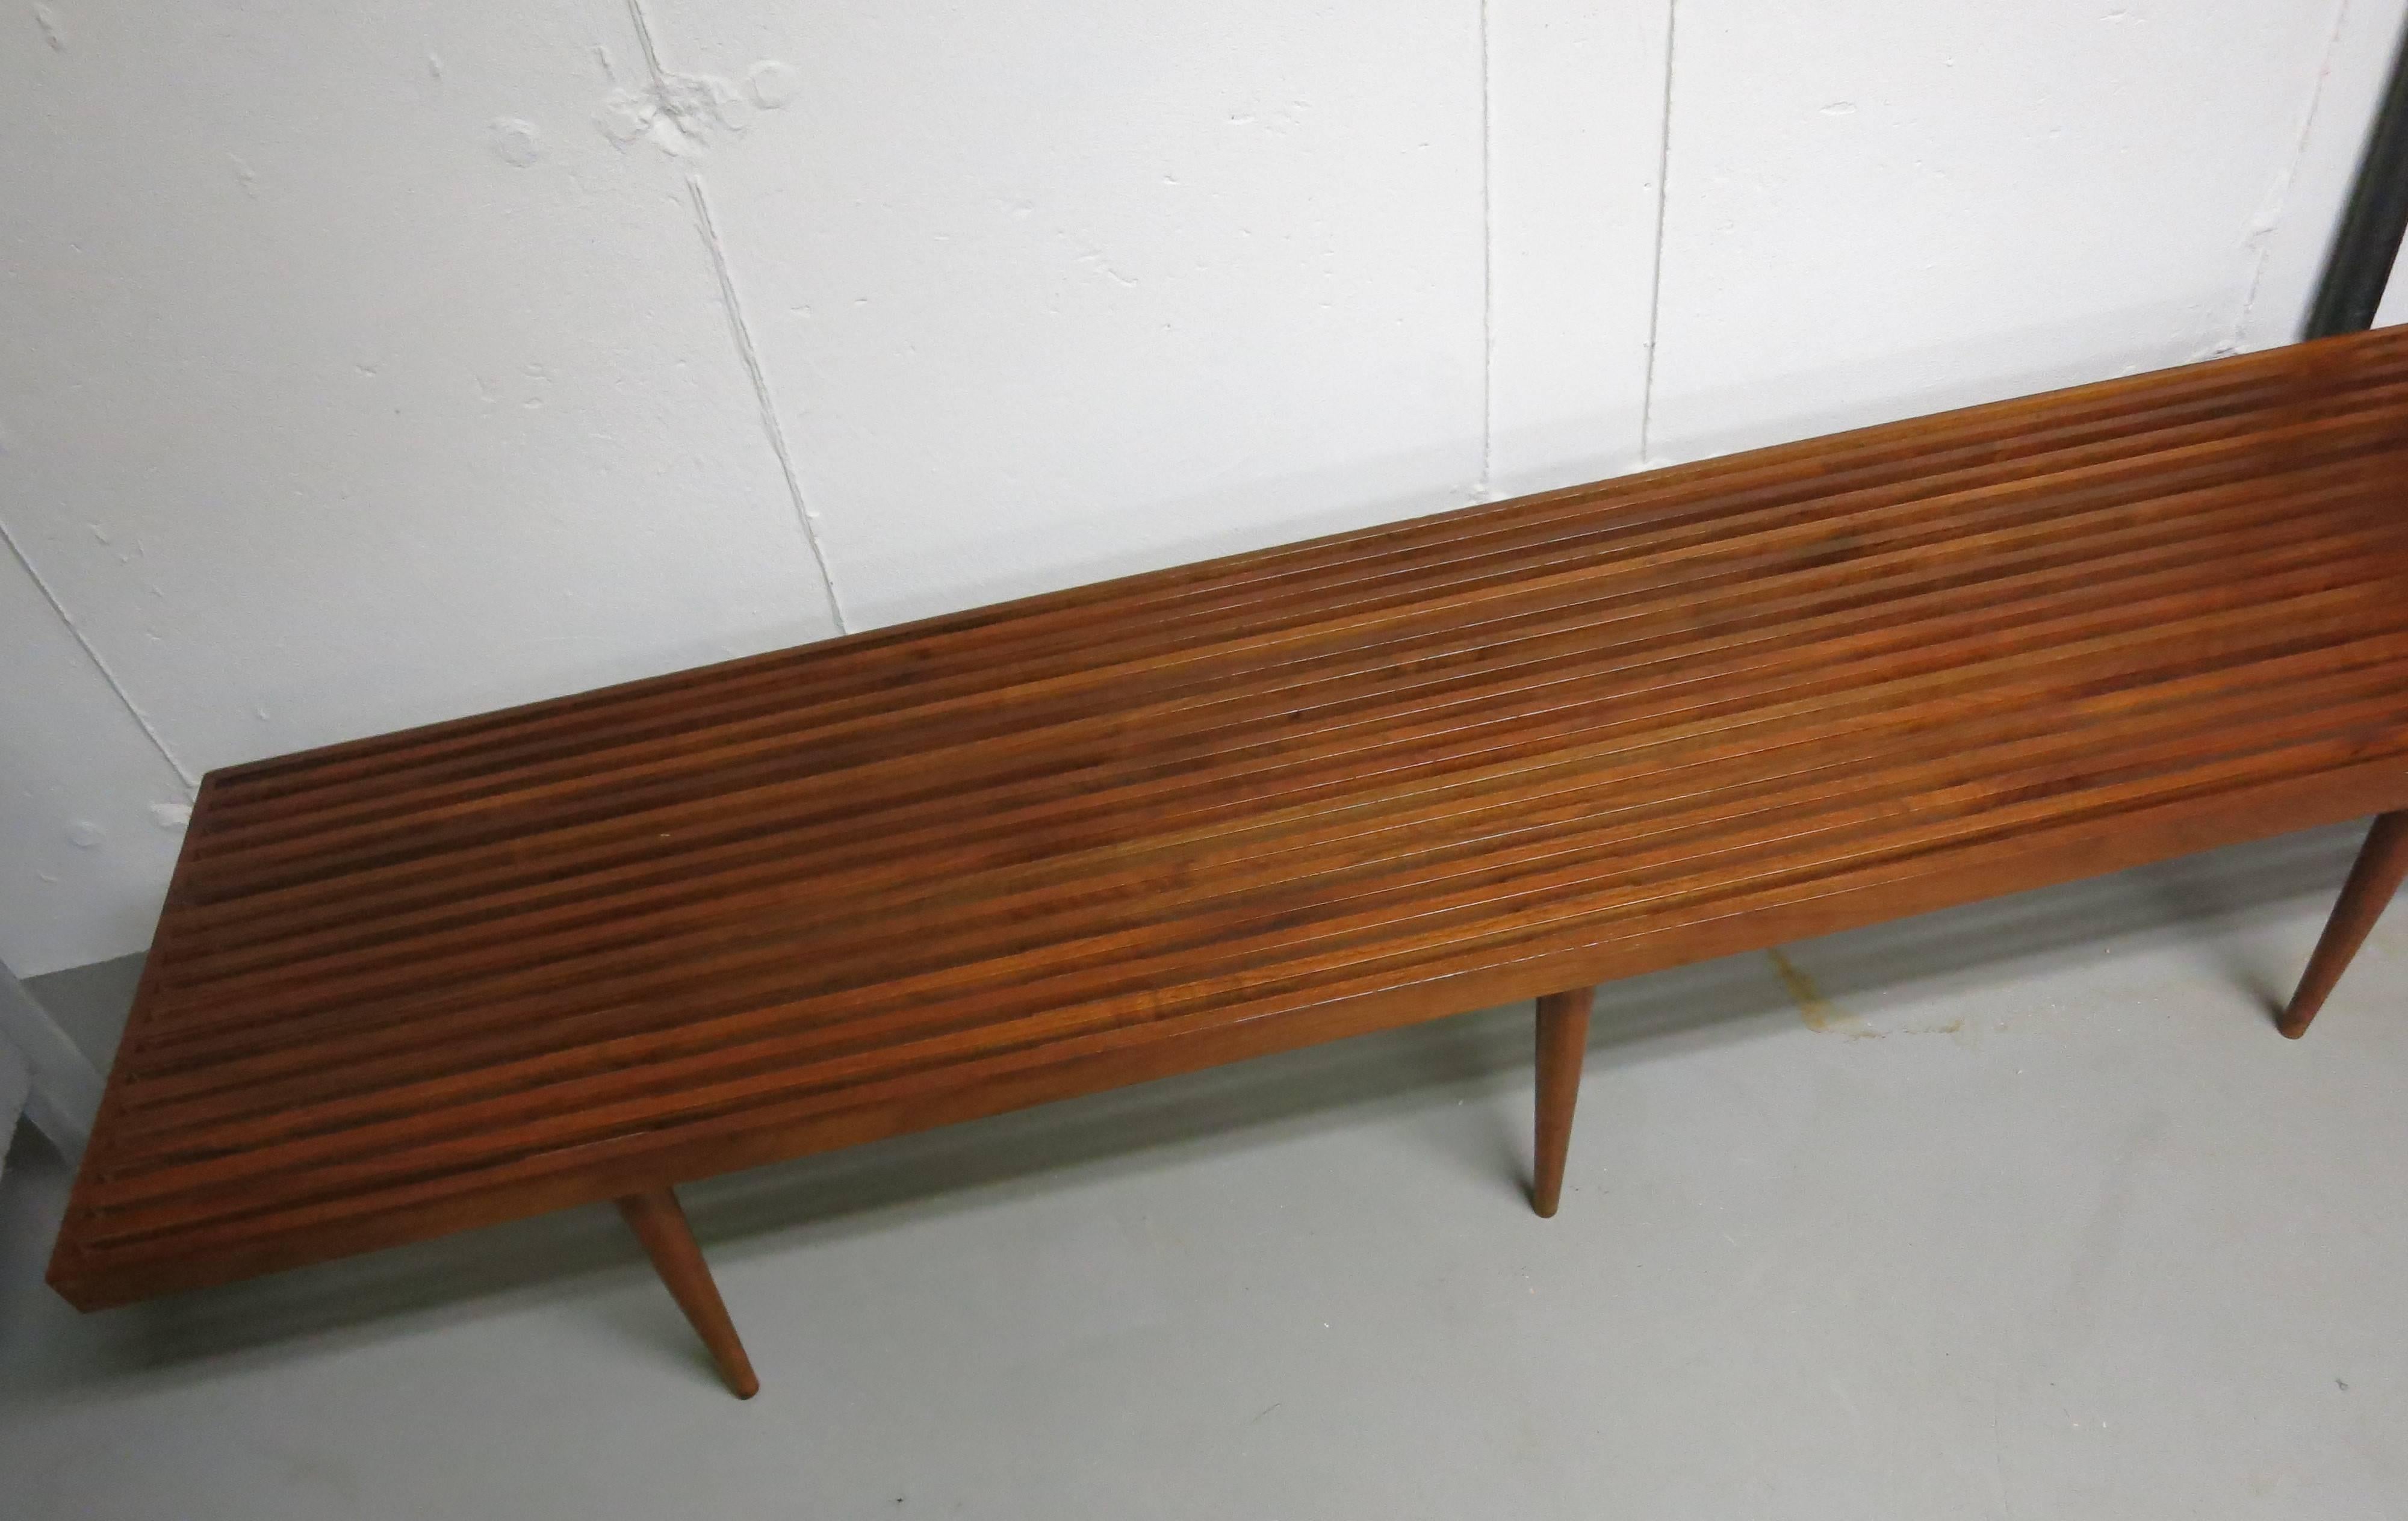 Vintage Mel Smilow long bench from the 1950s. Measures: It is 72